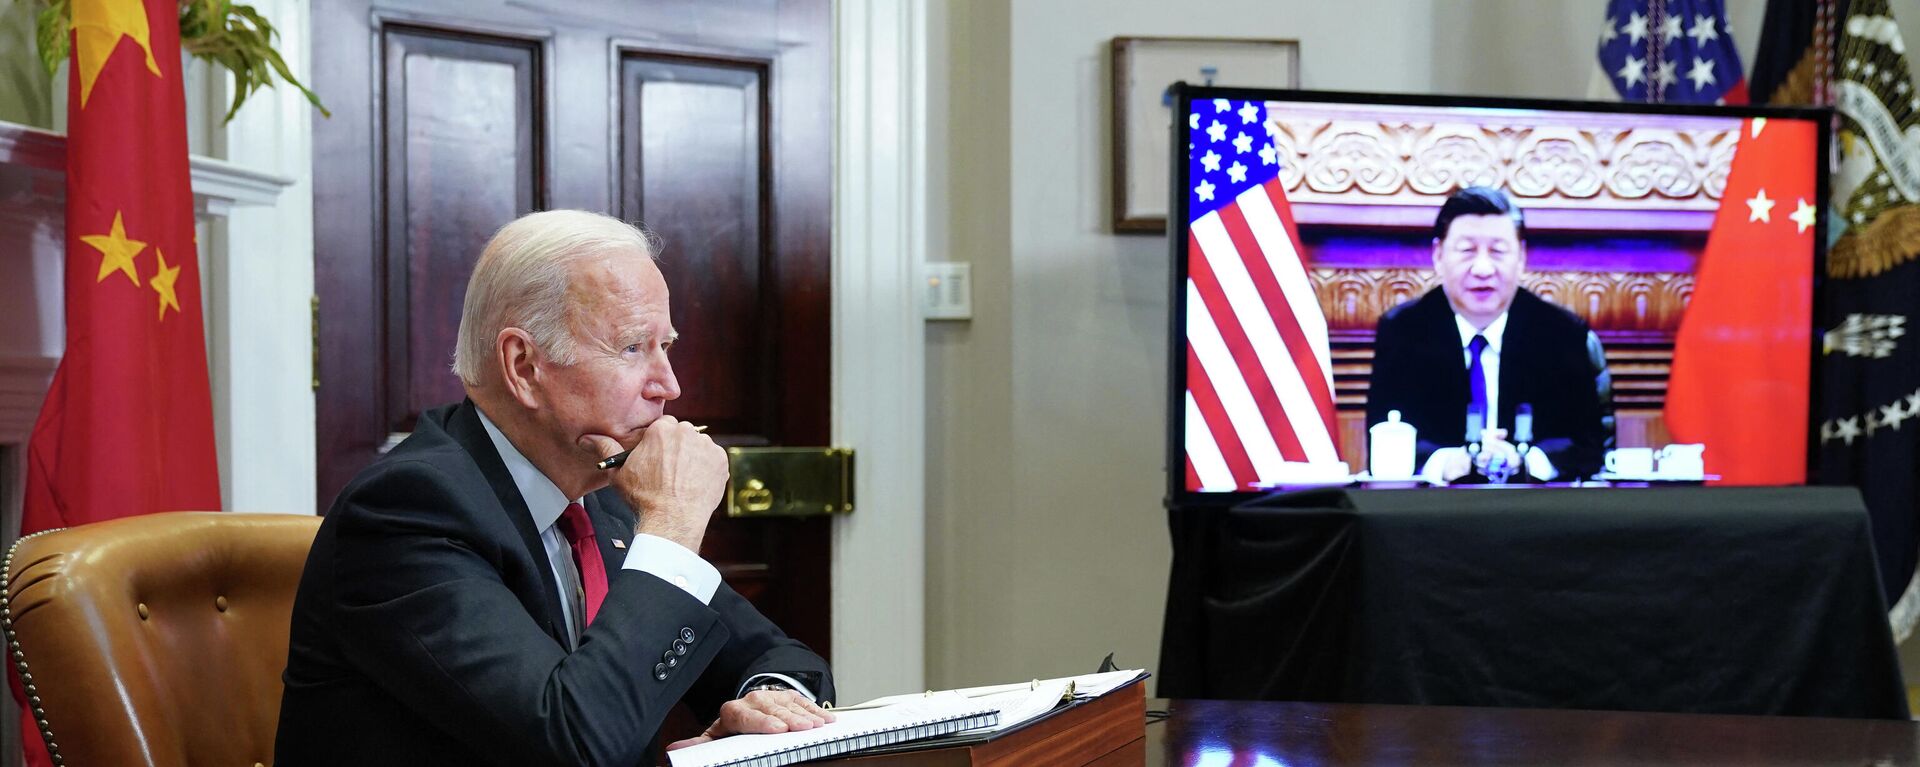 US President Joe Biden meets with China's President Xi Jinping during a virtual summit from the Roosevelt Room of the White House in Washington, DC, November 15, 2021.  - Sputnik International, 1920, 13.09.2022